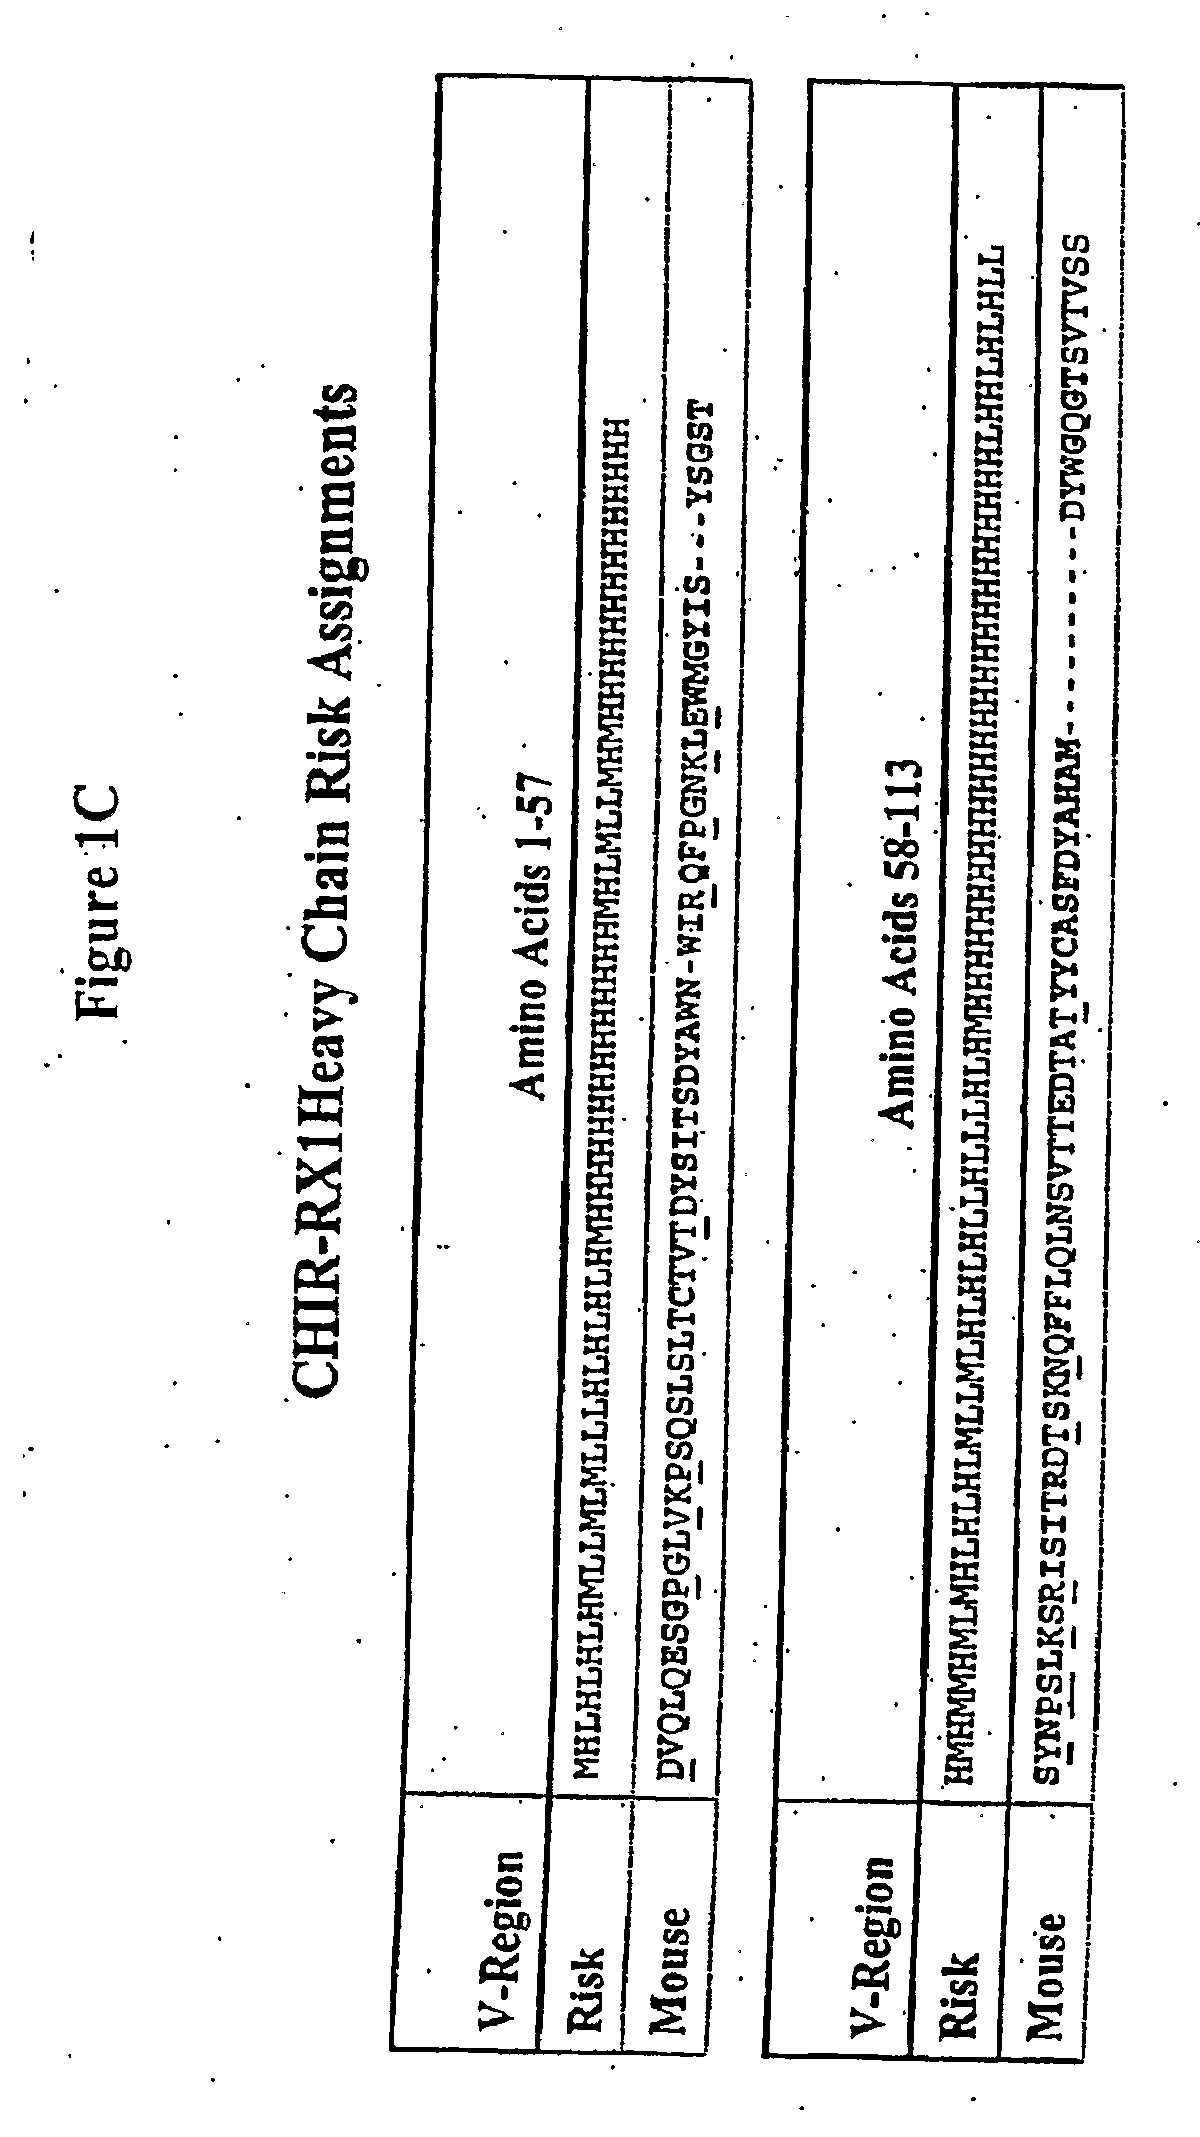 Methods for preventing and treating cancer metastasis and bone loss associated with cancer metastasis